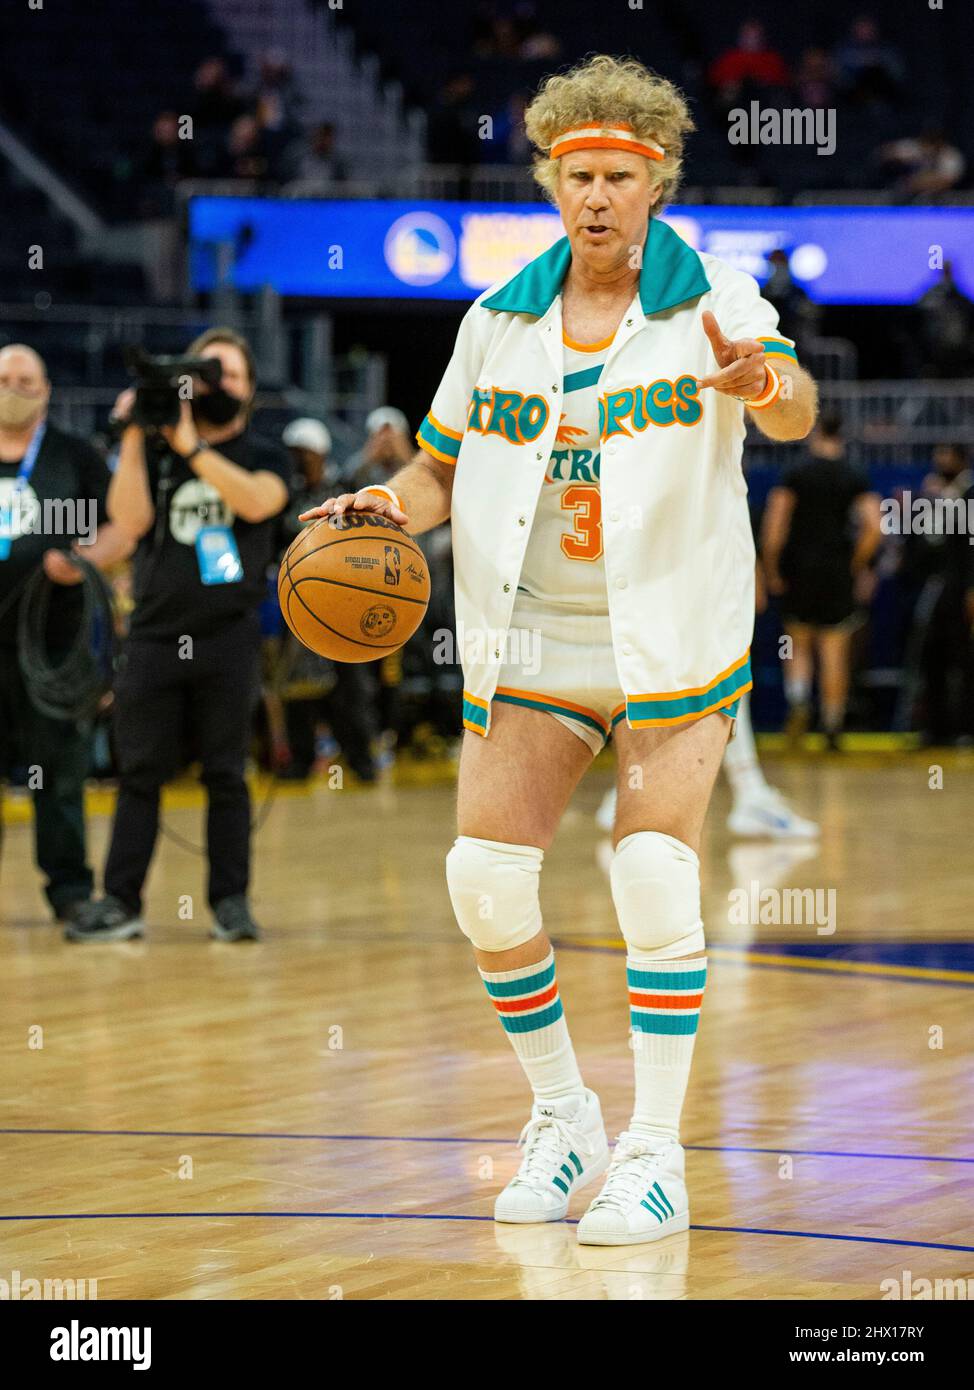 San Francisco, California. March 8, 2022, Actor Will Ferrell wears the Flint Tropics uniform from the feature film 'Semi-Pro' and joins the Golden State Warriors during warm-ups before the team plays against the Los Angeles Clippers at Chase Center on March 8, 2022 in San Francisco, California. Credit: CV/ImageSpace/MediaPunch Stock Photo